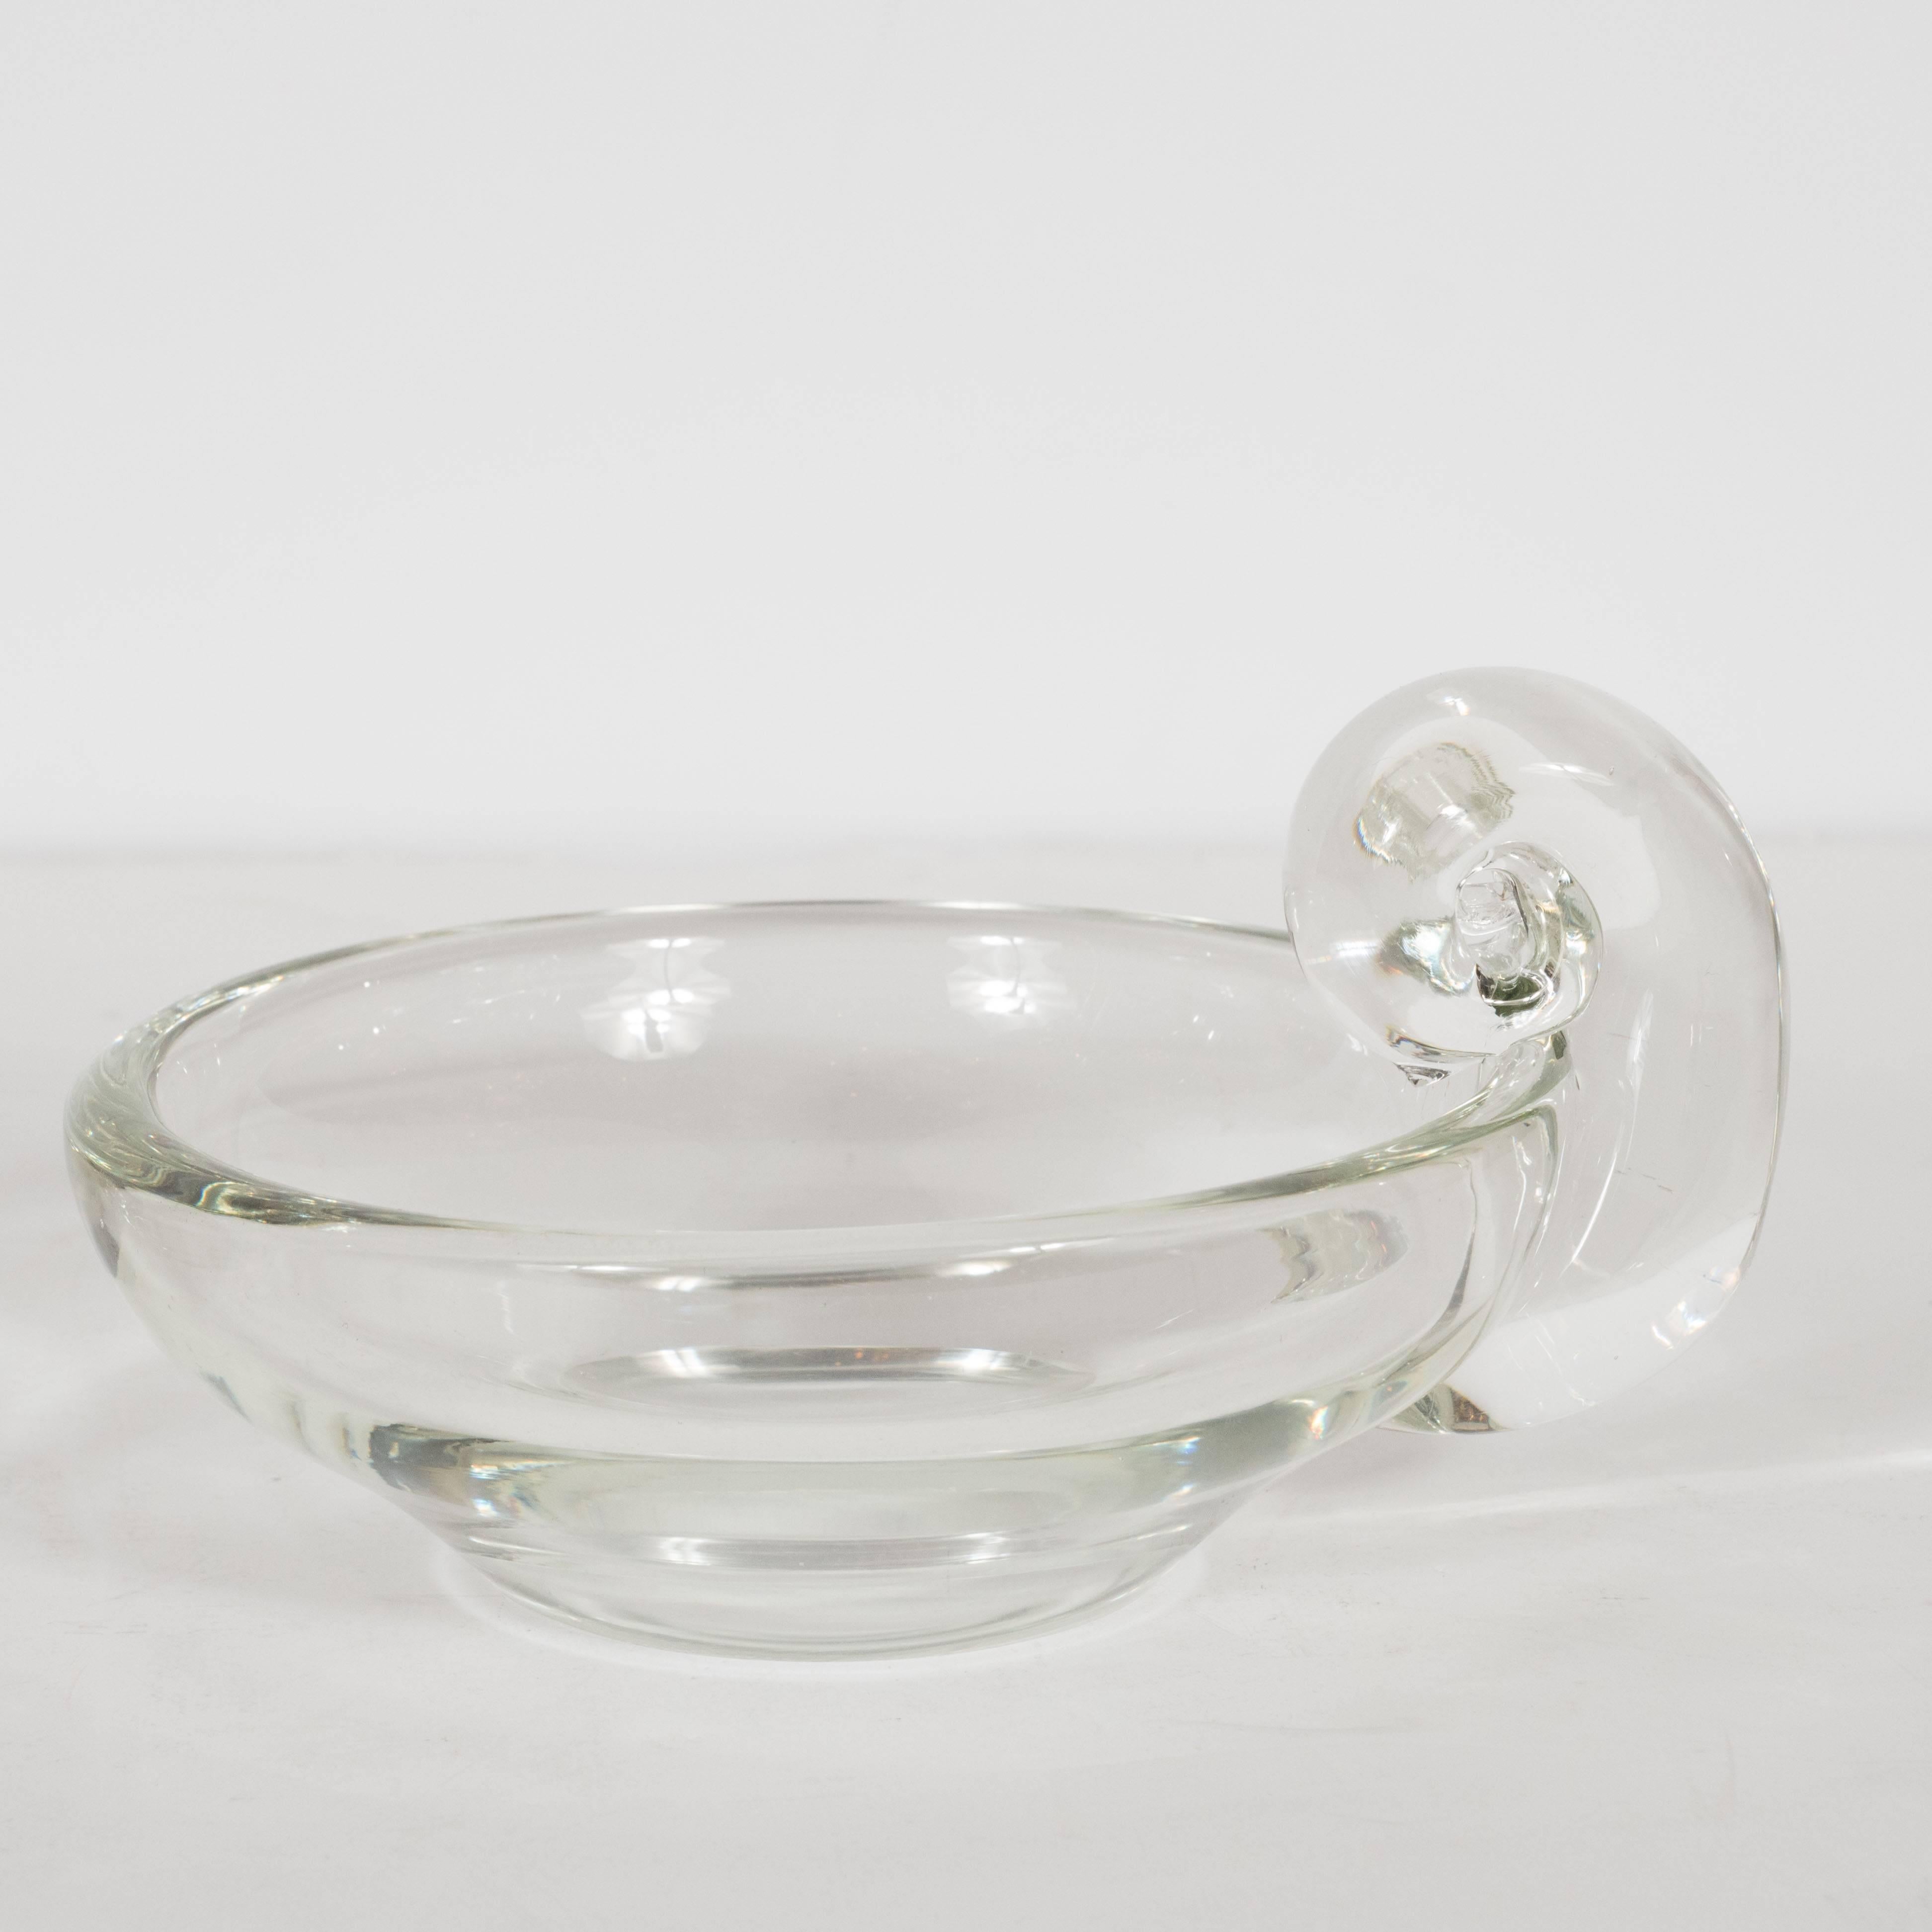 This refined pair of Mid-Century Modern bowls were handcrafted by the storied American glass studio, Steuben, circa 1960. They feature gently sloping sides and scroll style handles that resemble stylized ram horns. They would be perfect for